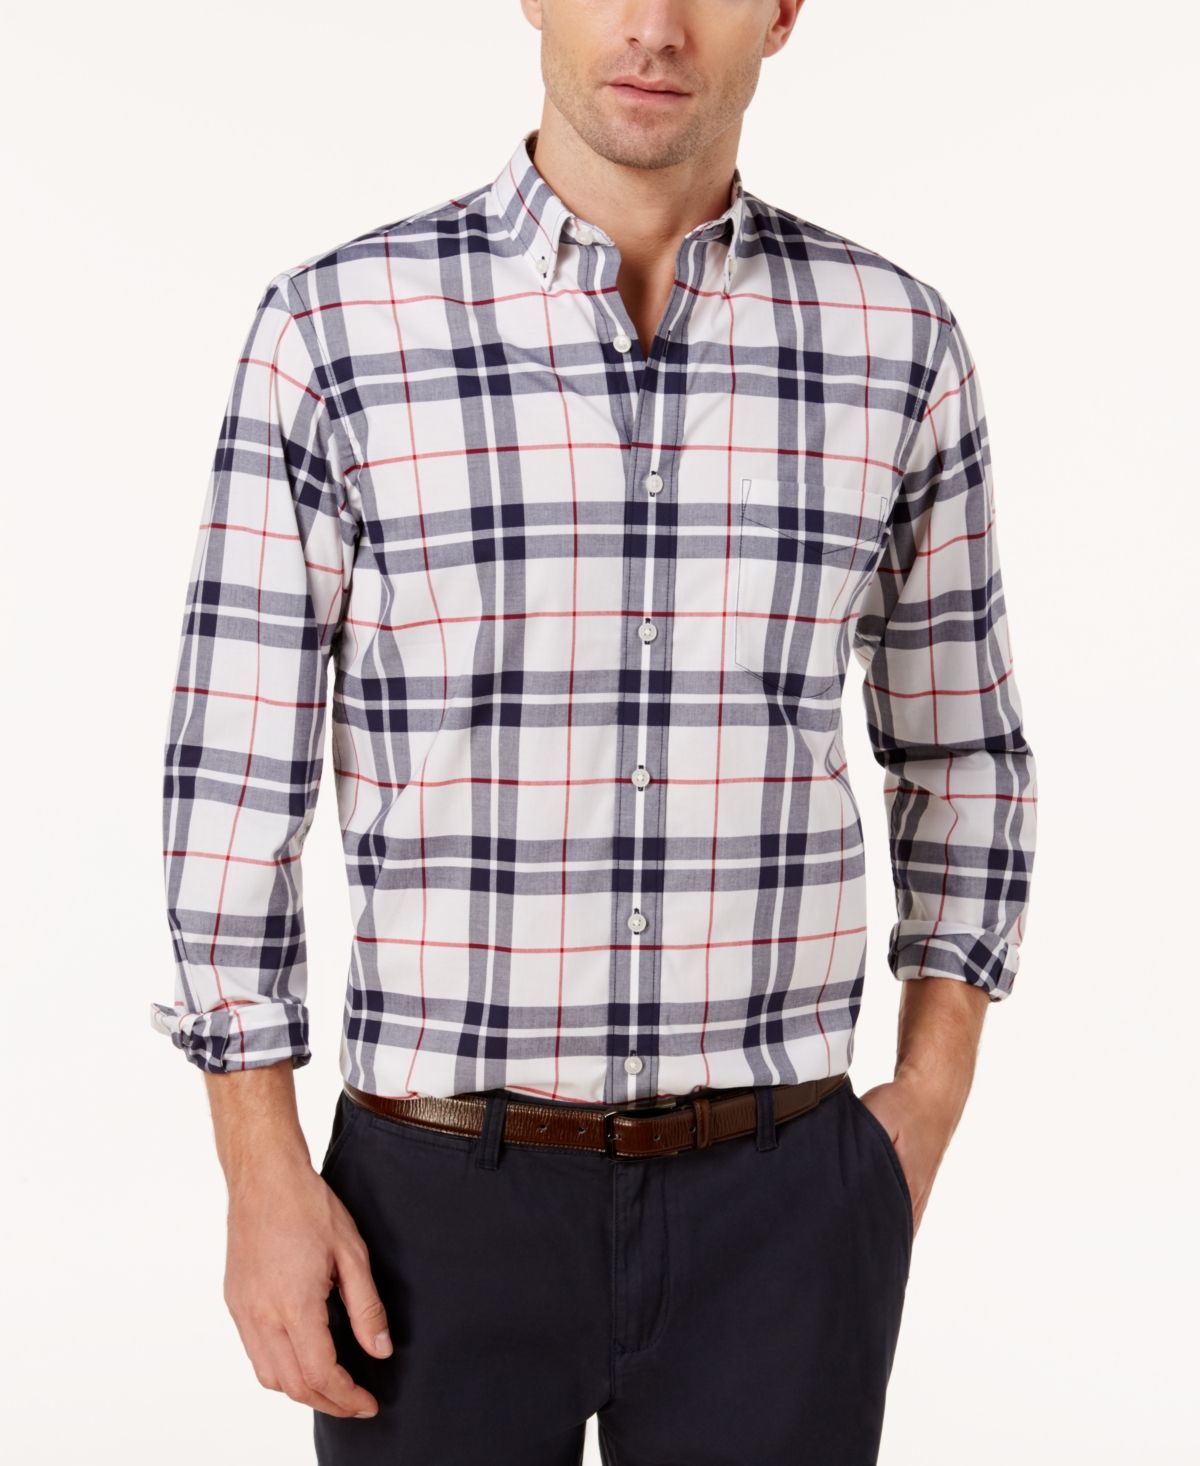 Men's Perry Plaid Stretch Shirt with Pocket, Created for Macy's - Mostrich